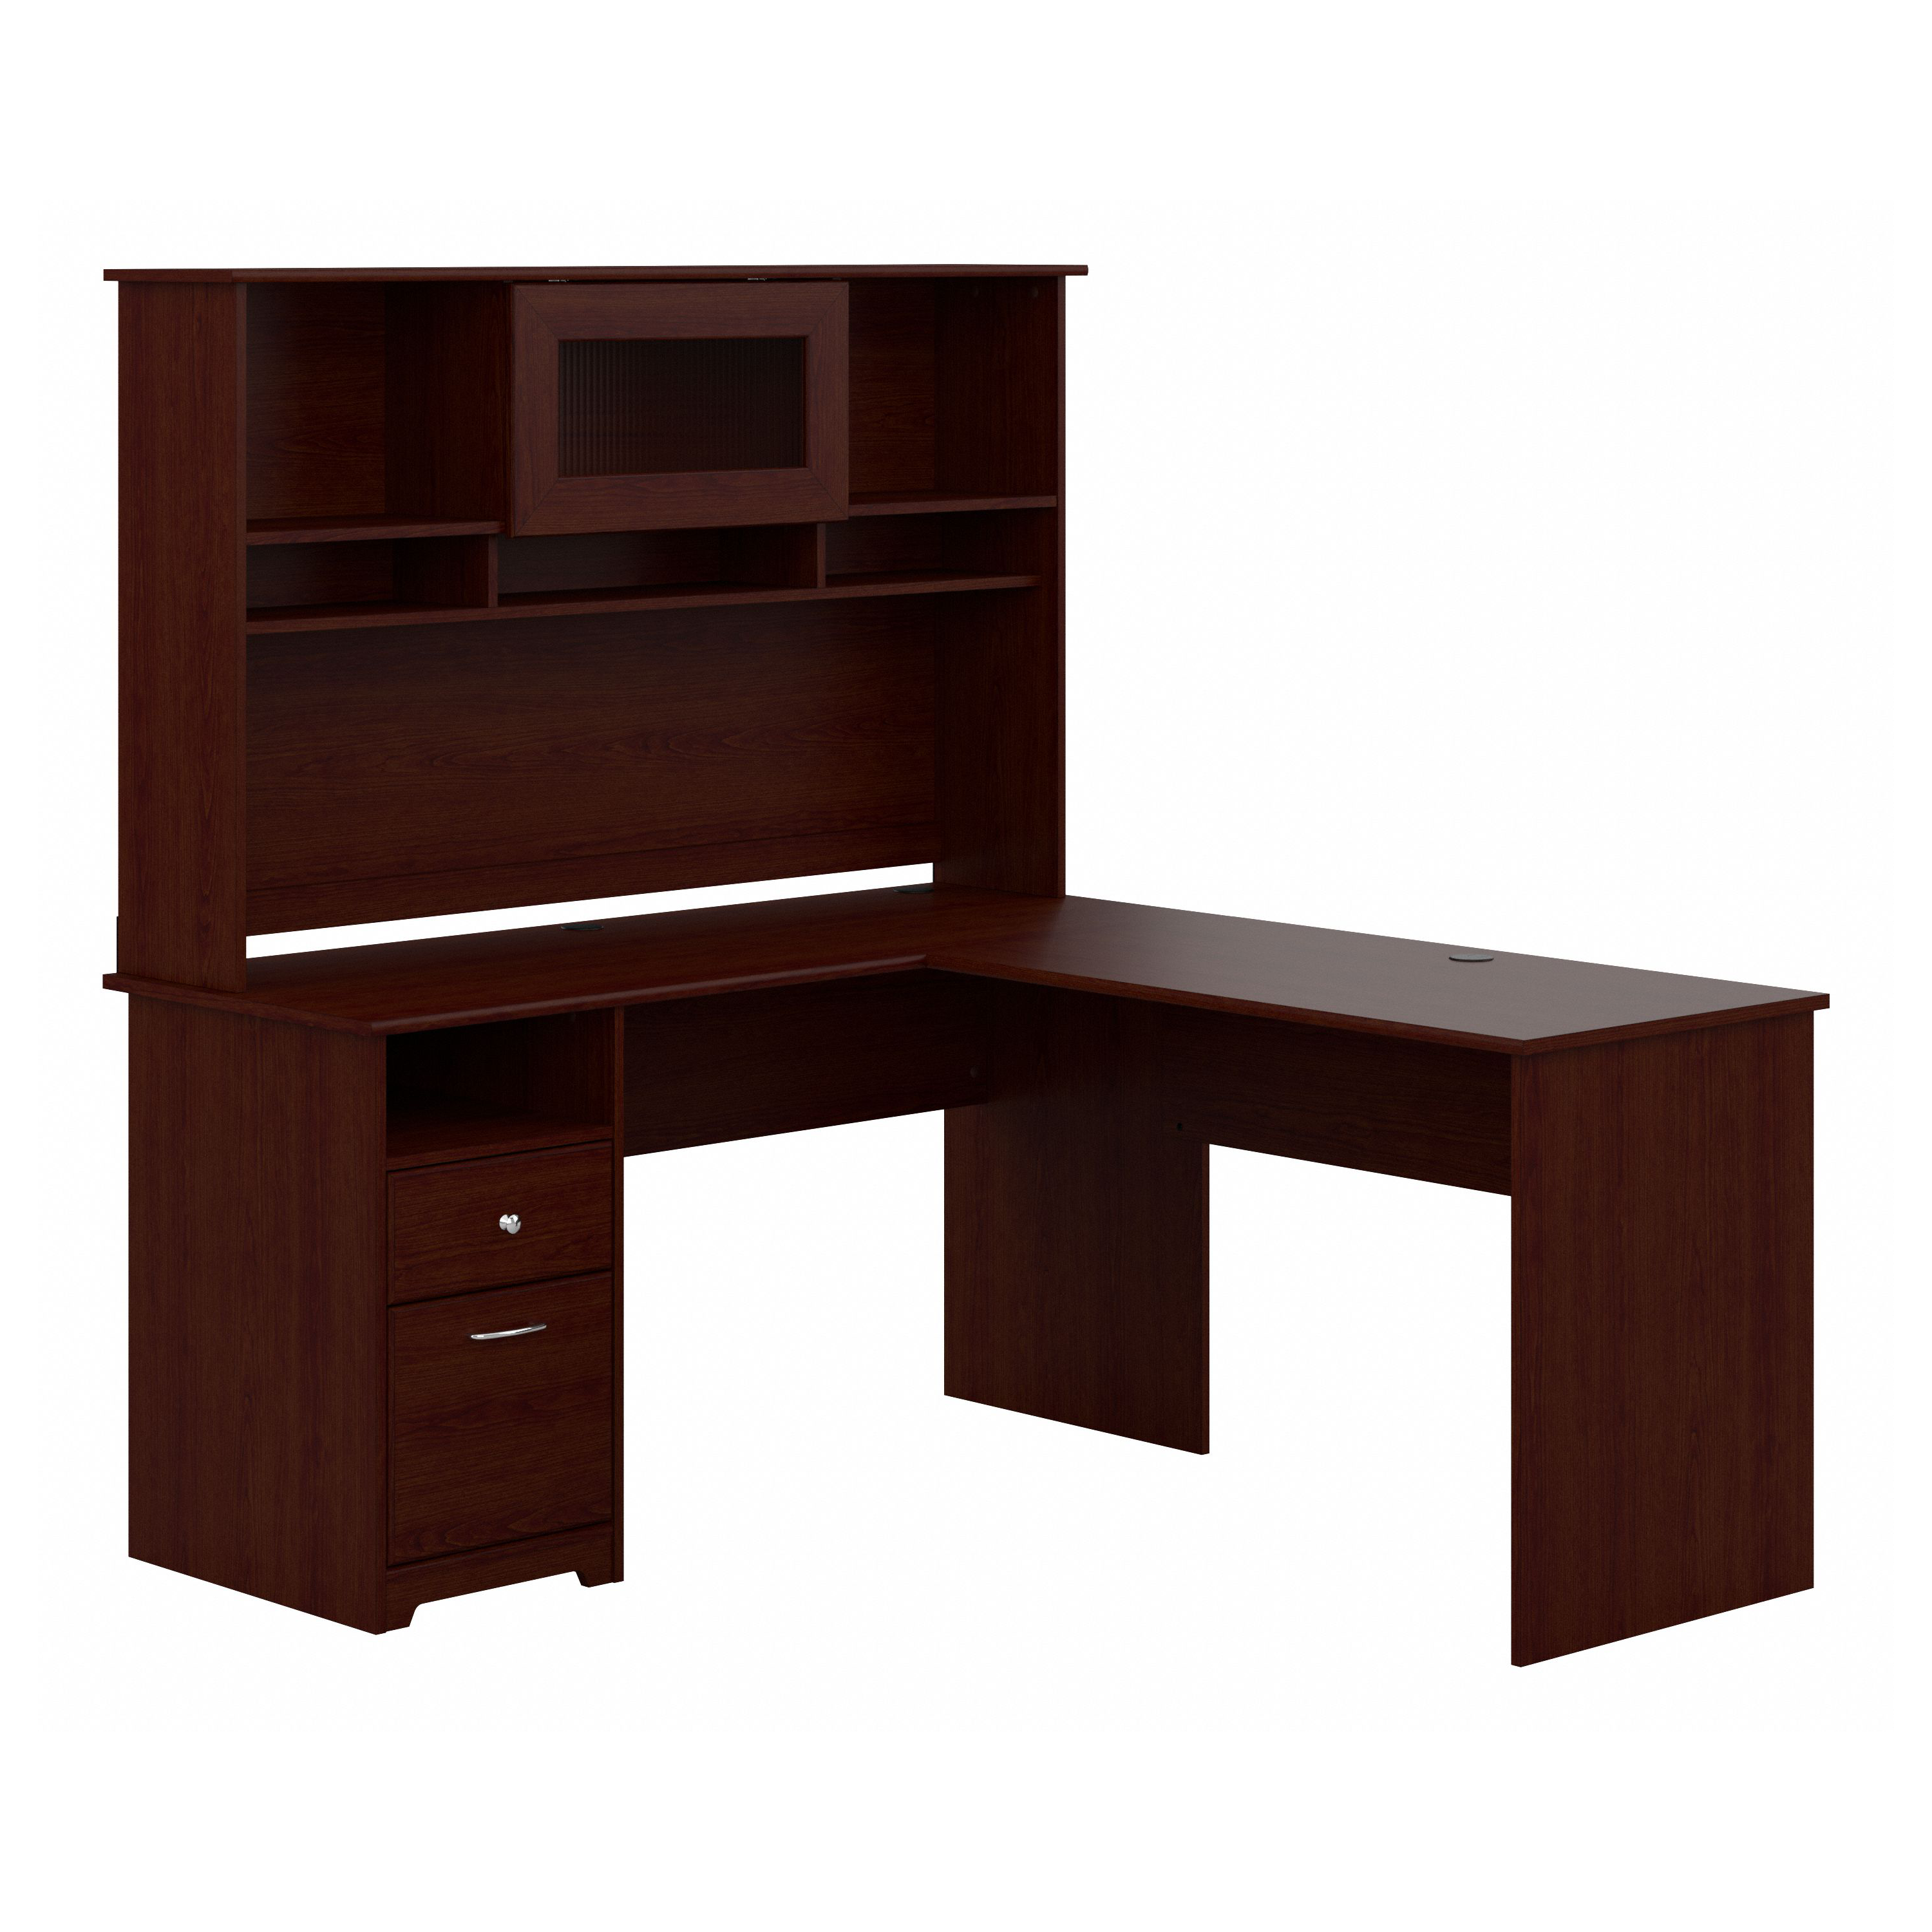 Shop Bush Furniture Cabot 60W L Shaped Computer Desk with Hutch and Drawers 02 CAB046HVC #color_harvest cherry